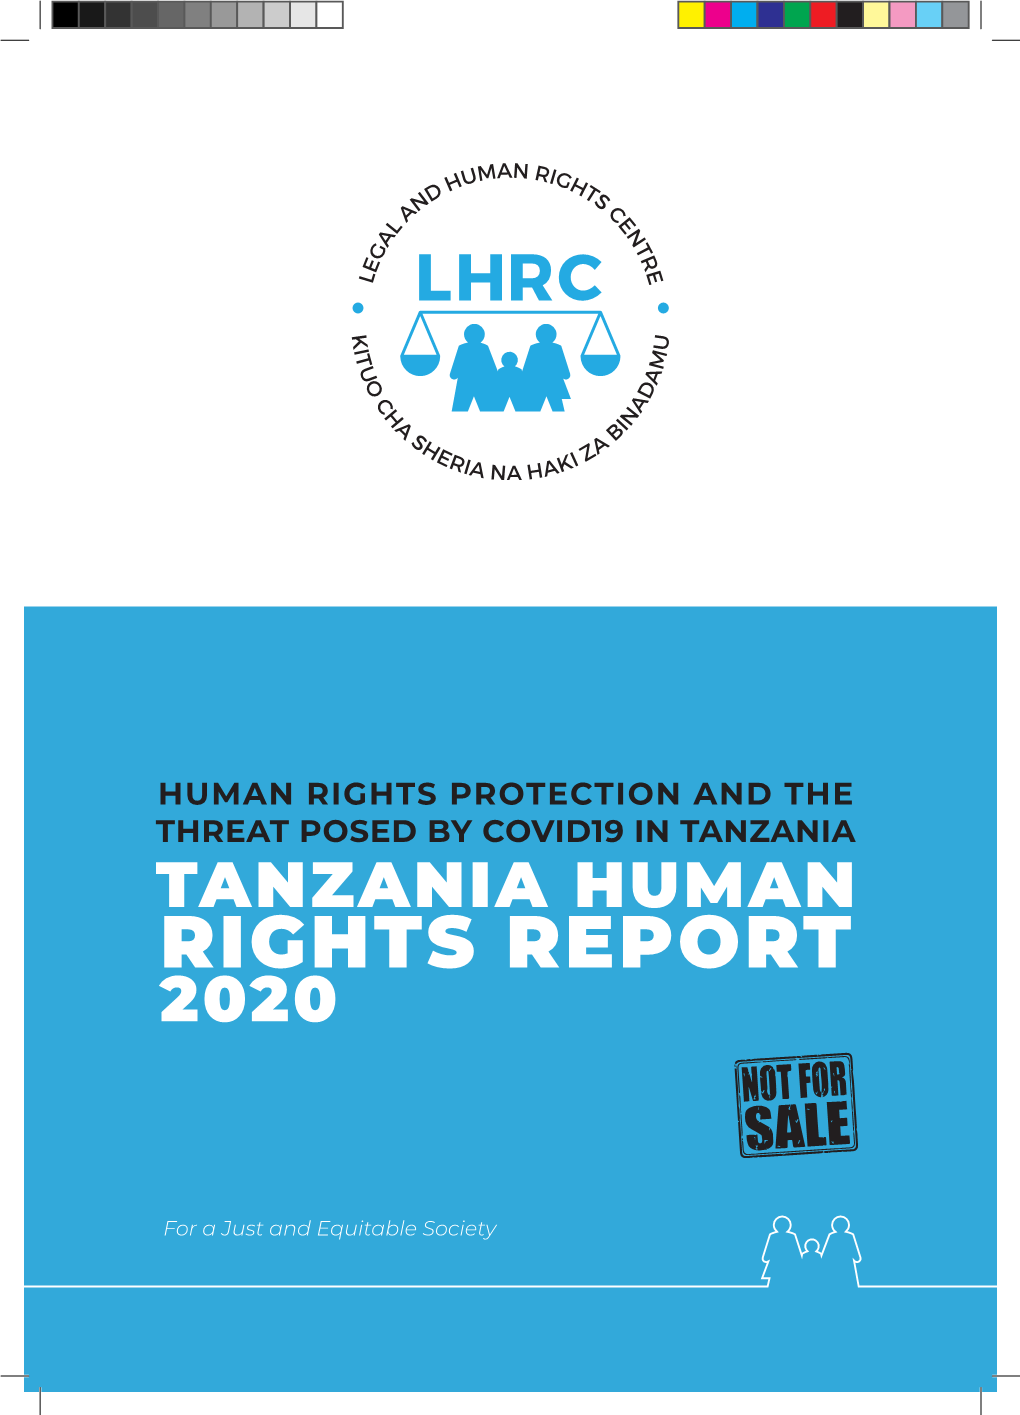 Rights Report 2020